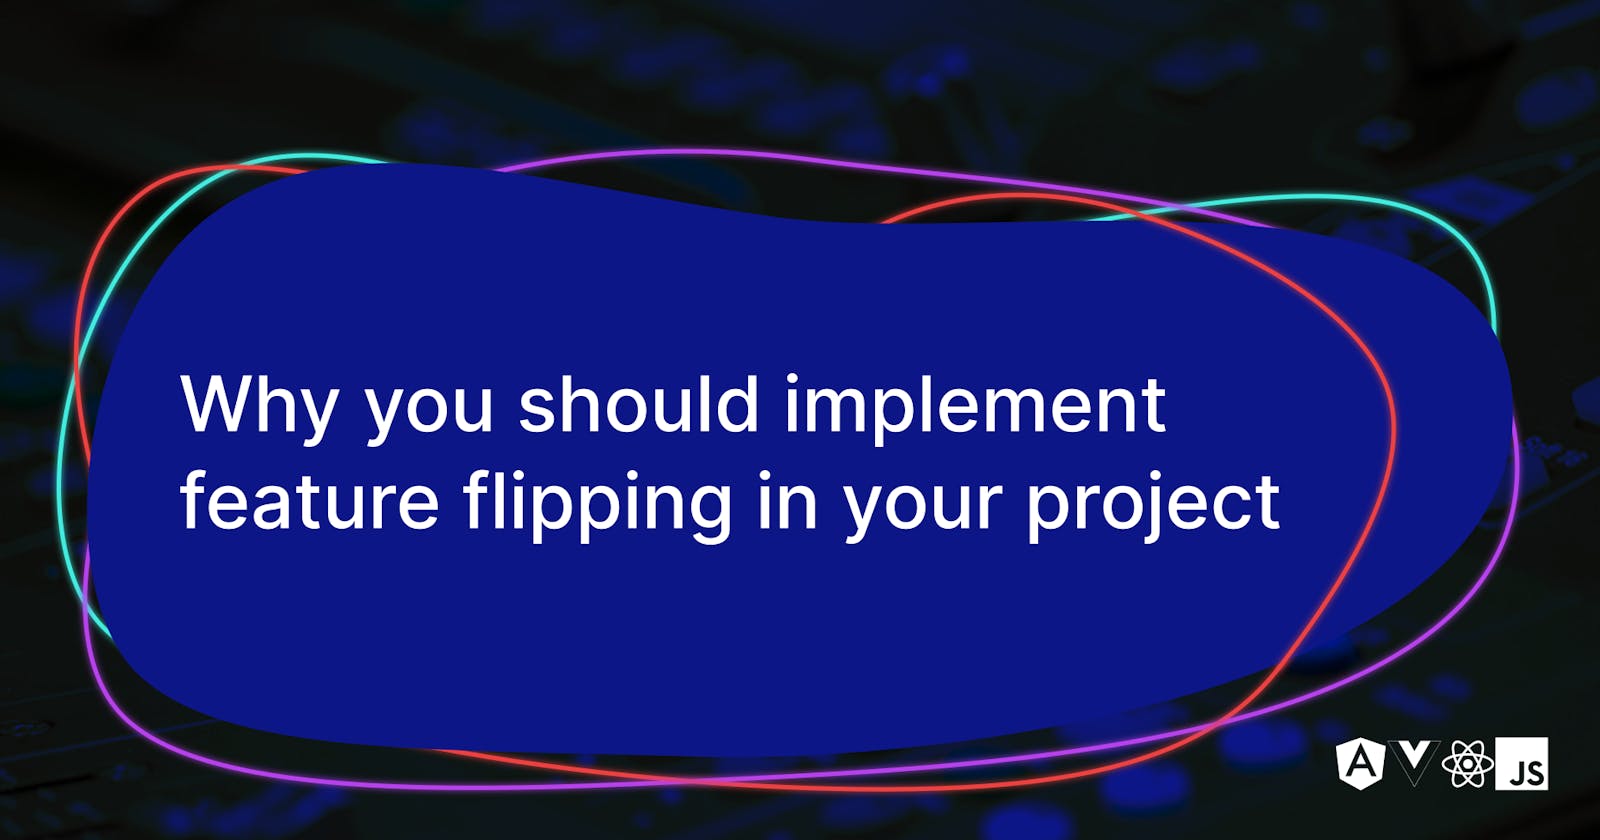 Why you should implement feature flipping in your project